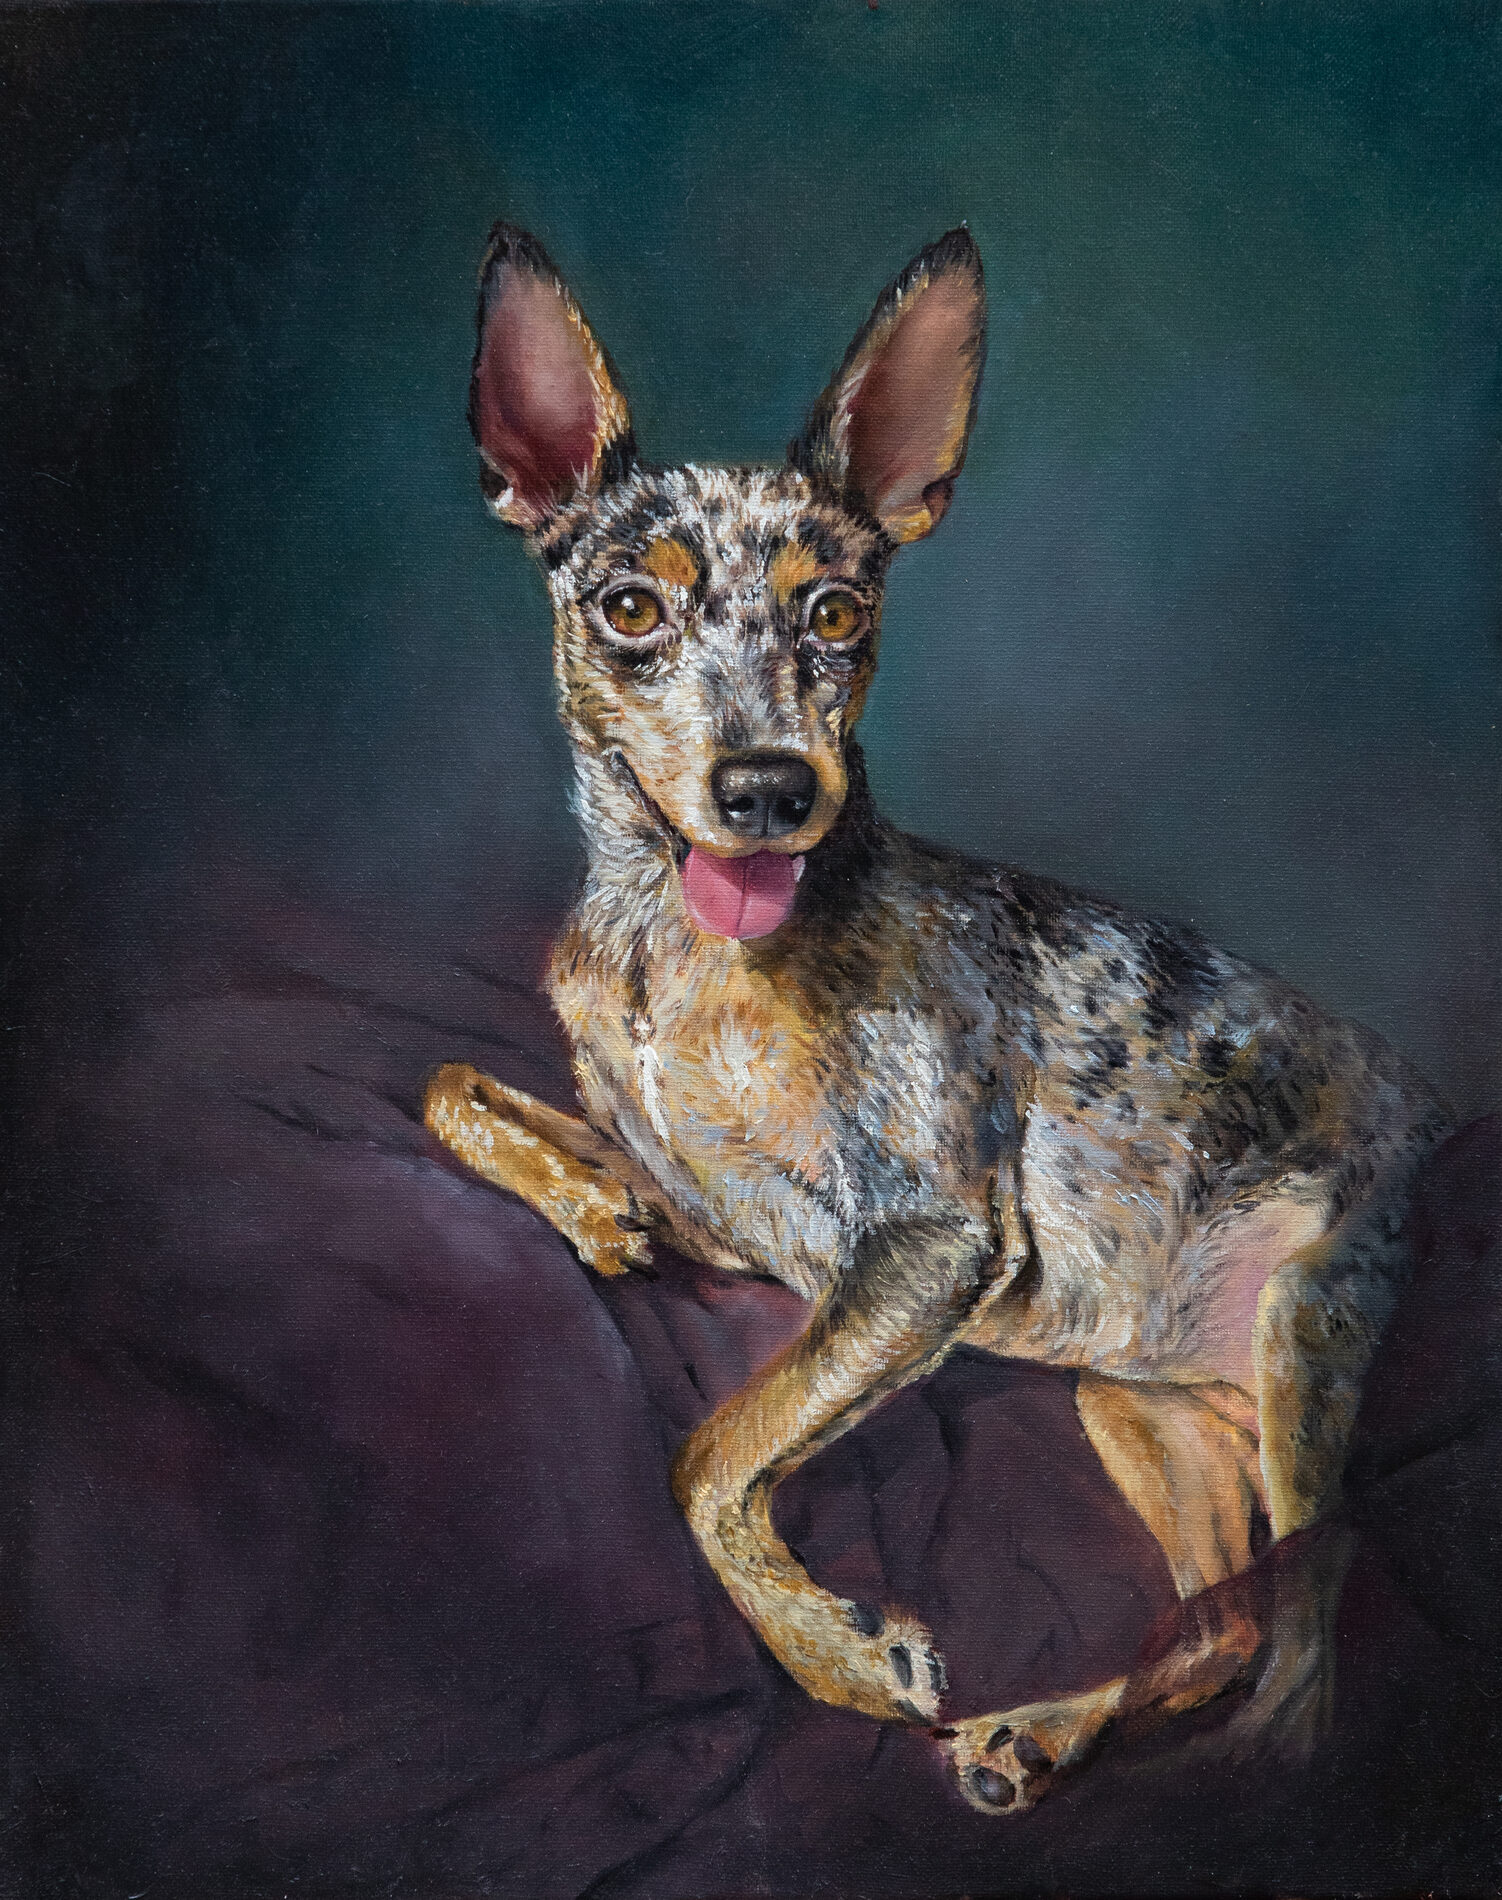 A painting of a dog sitting on a couch.